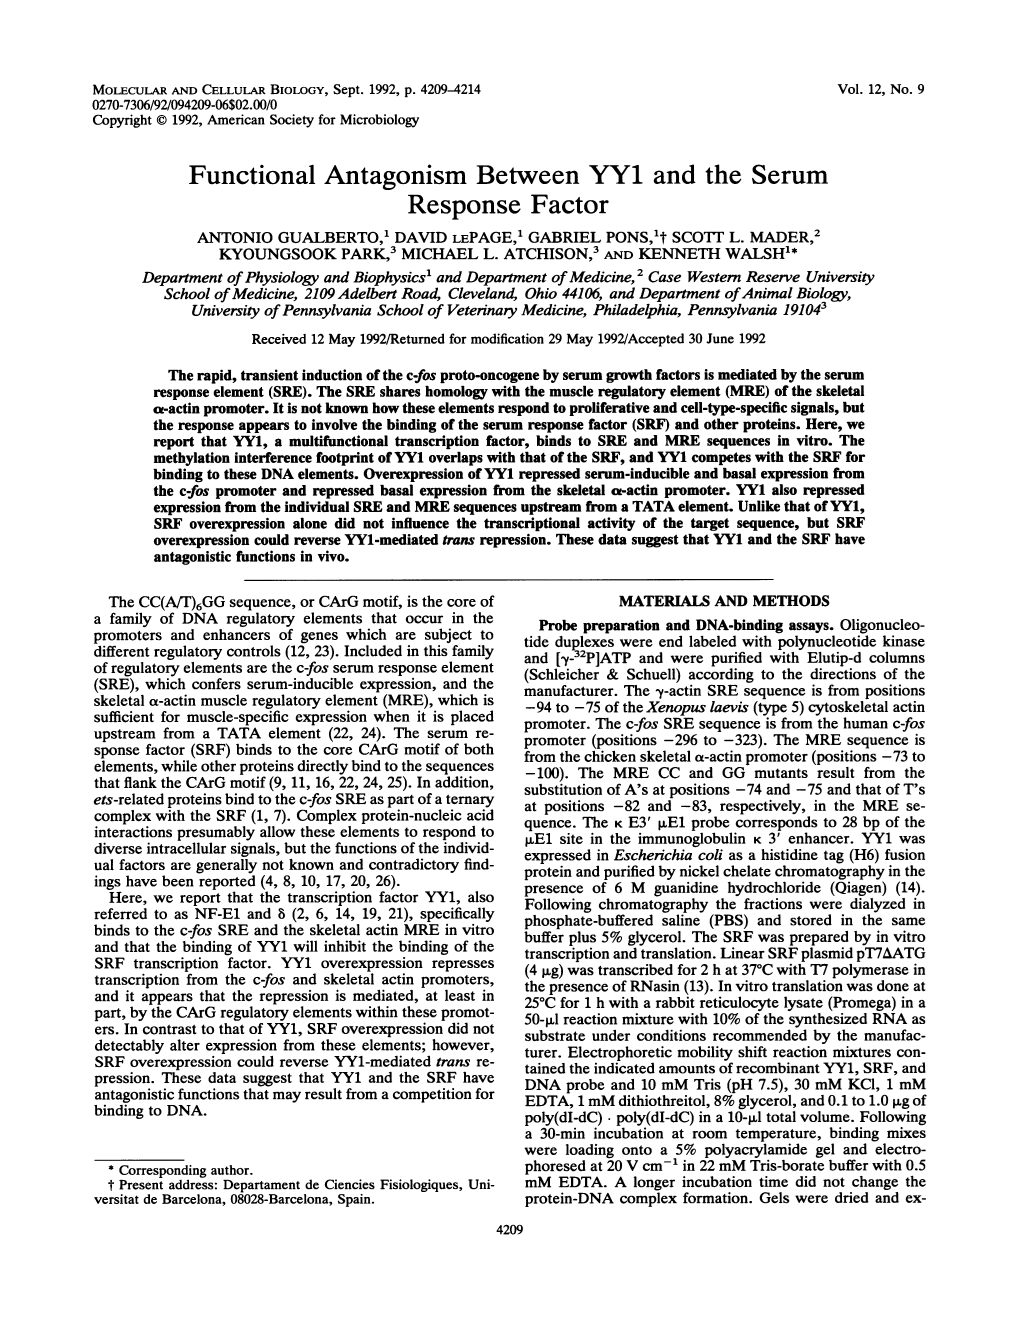 Functional Antagonism Between YY1 and the Serum Response Factor